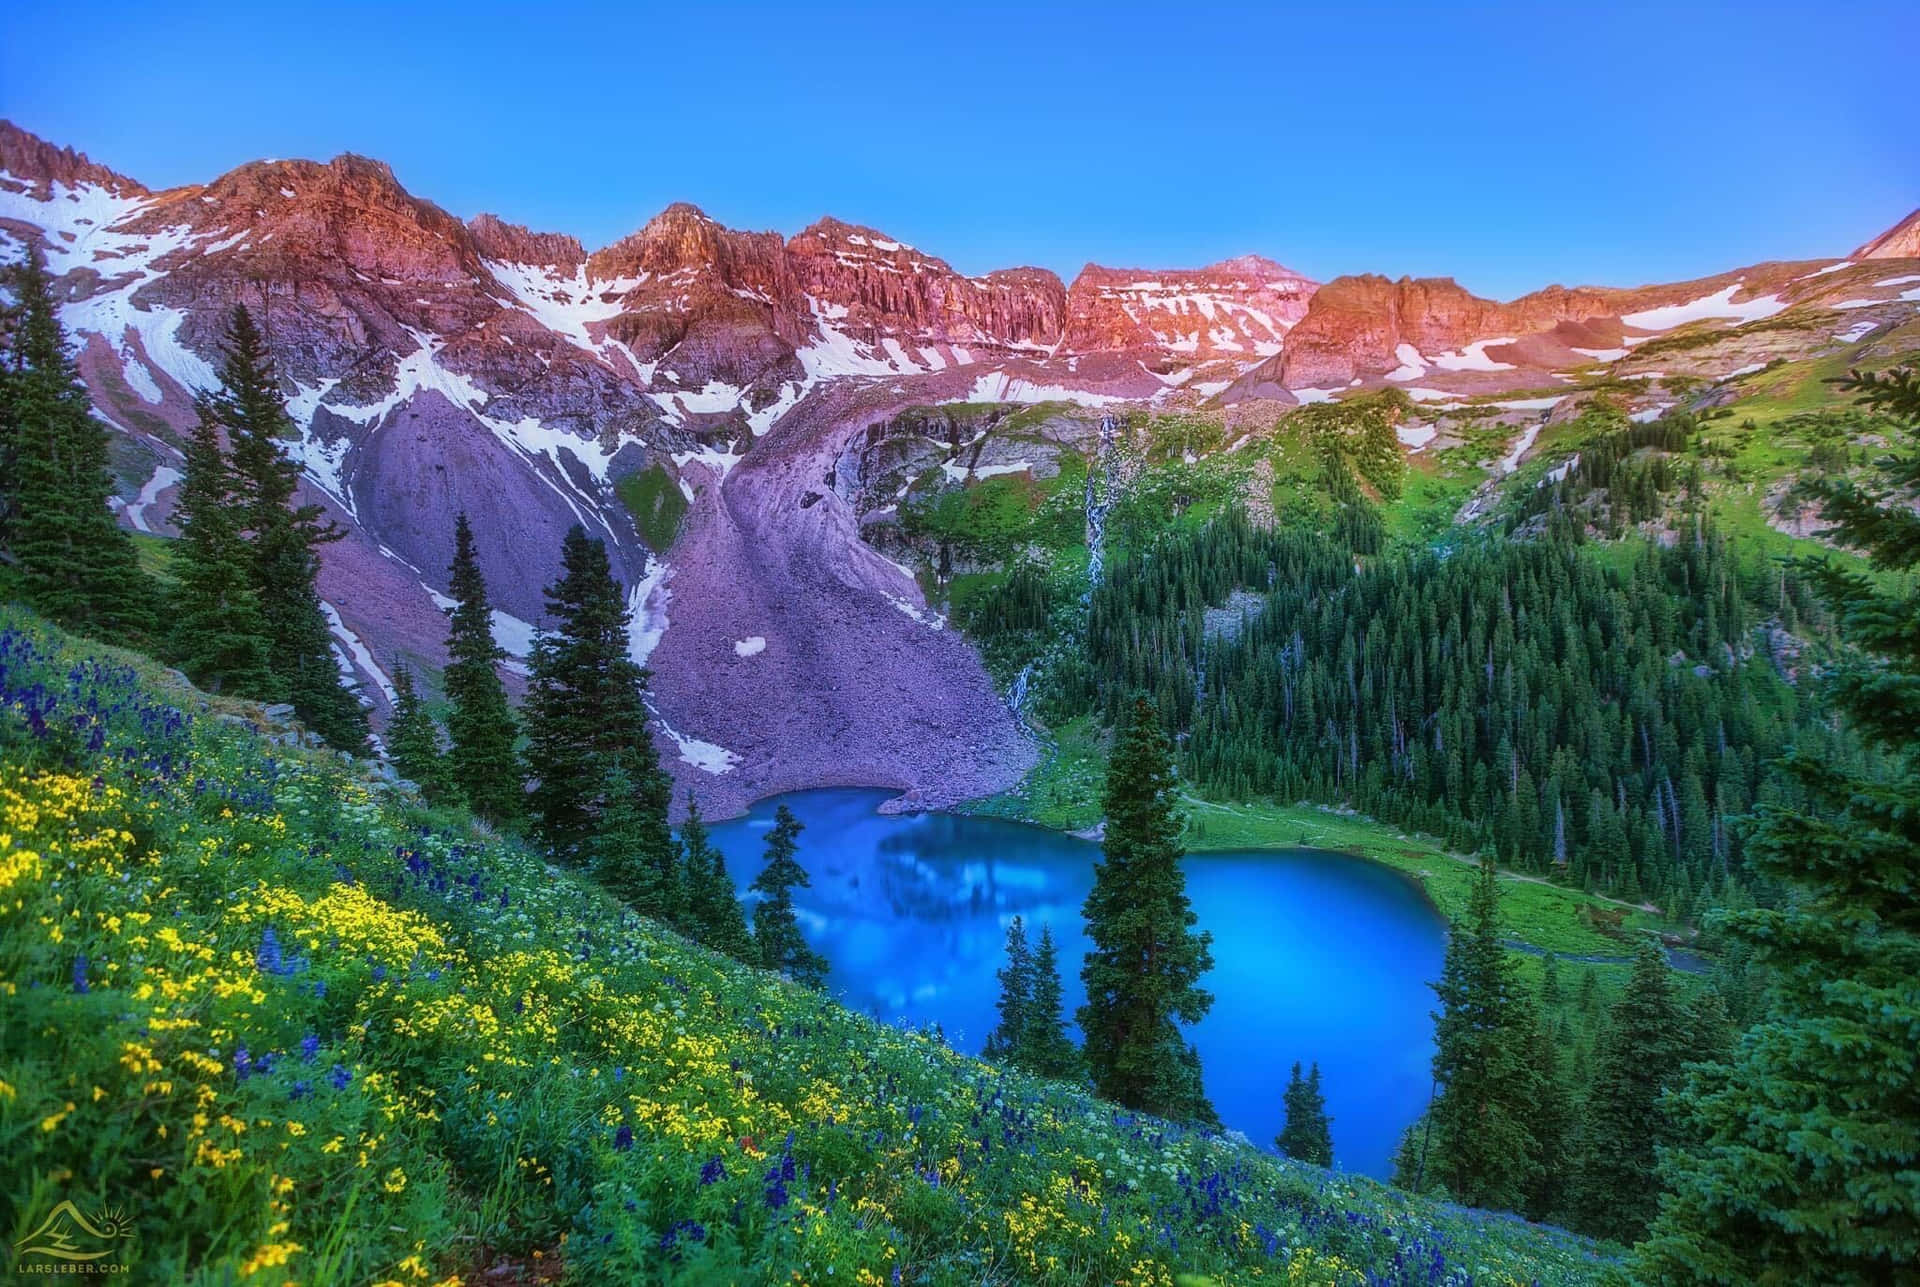 Majestic Mountains and Serene Lake in Colorado